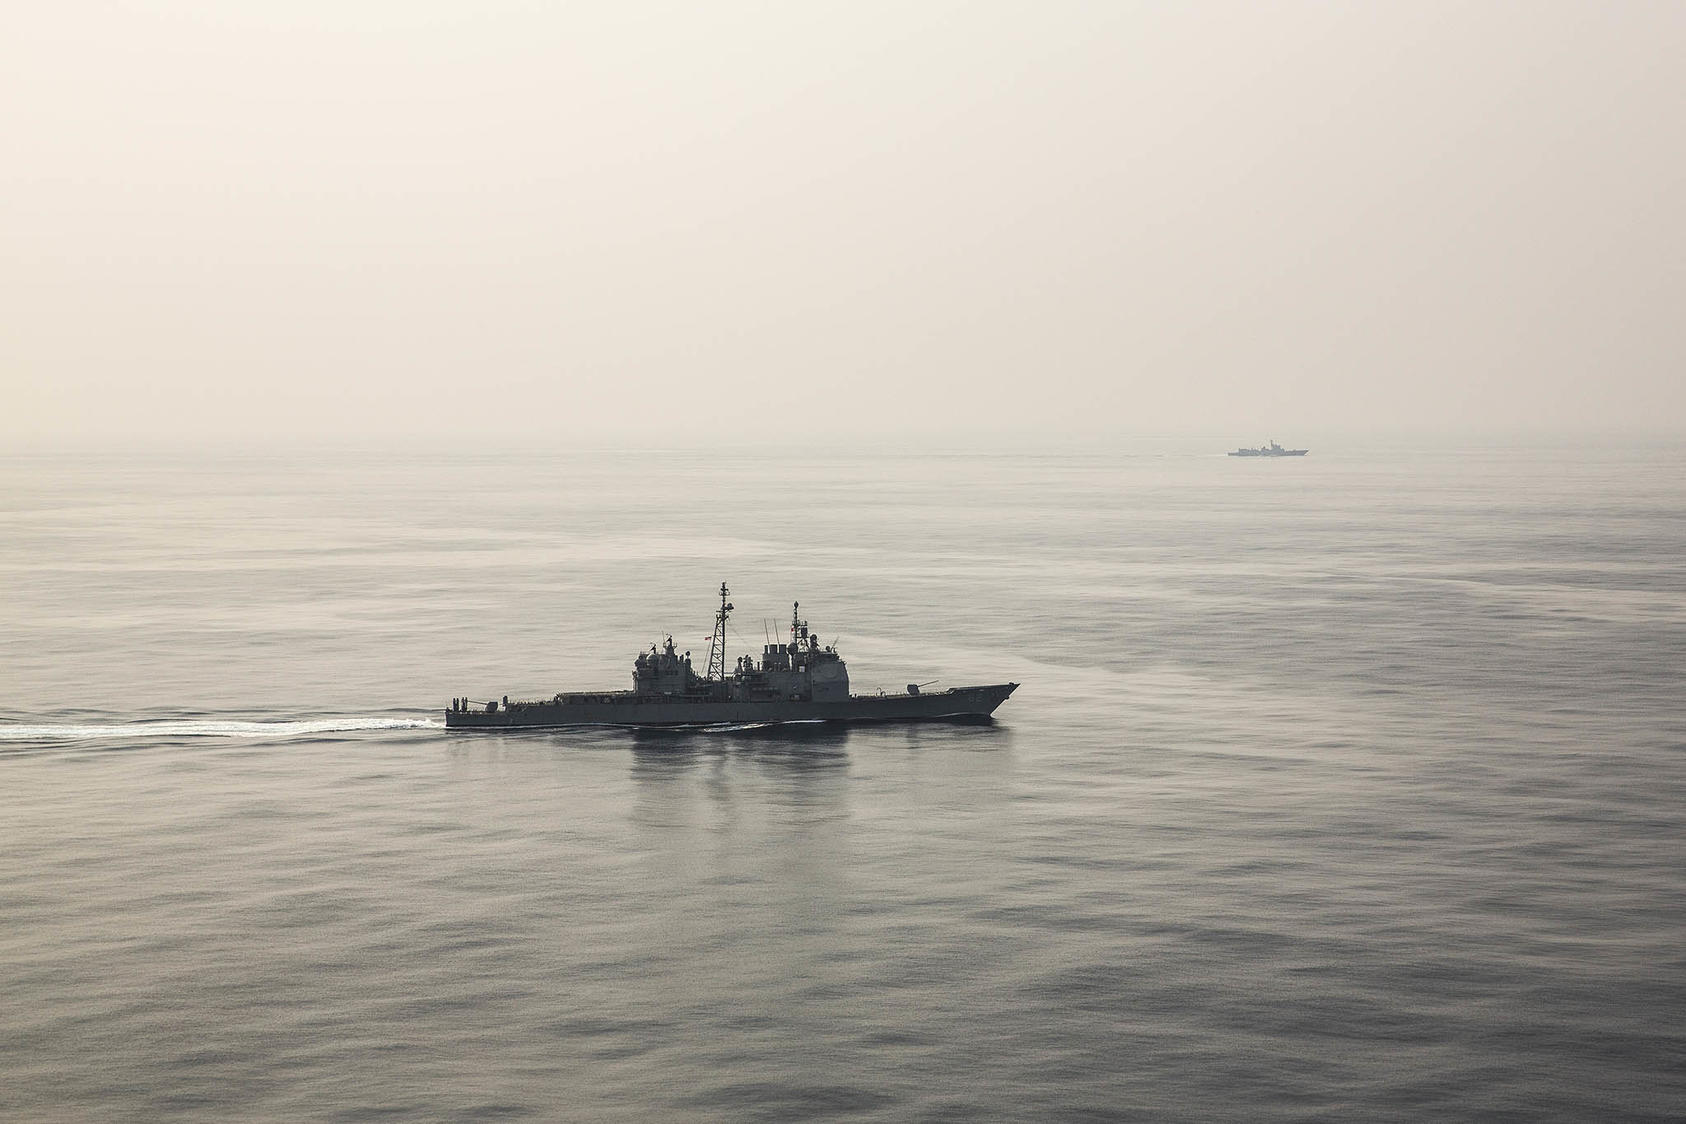 A Chinese frigate in the South China Sea, March 23, 2016. (Bryan Denton/The New York Times)